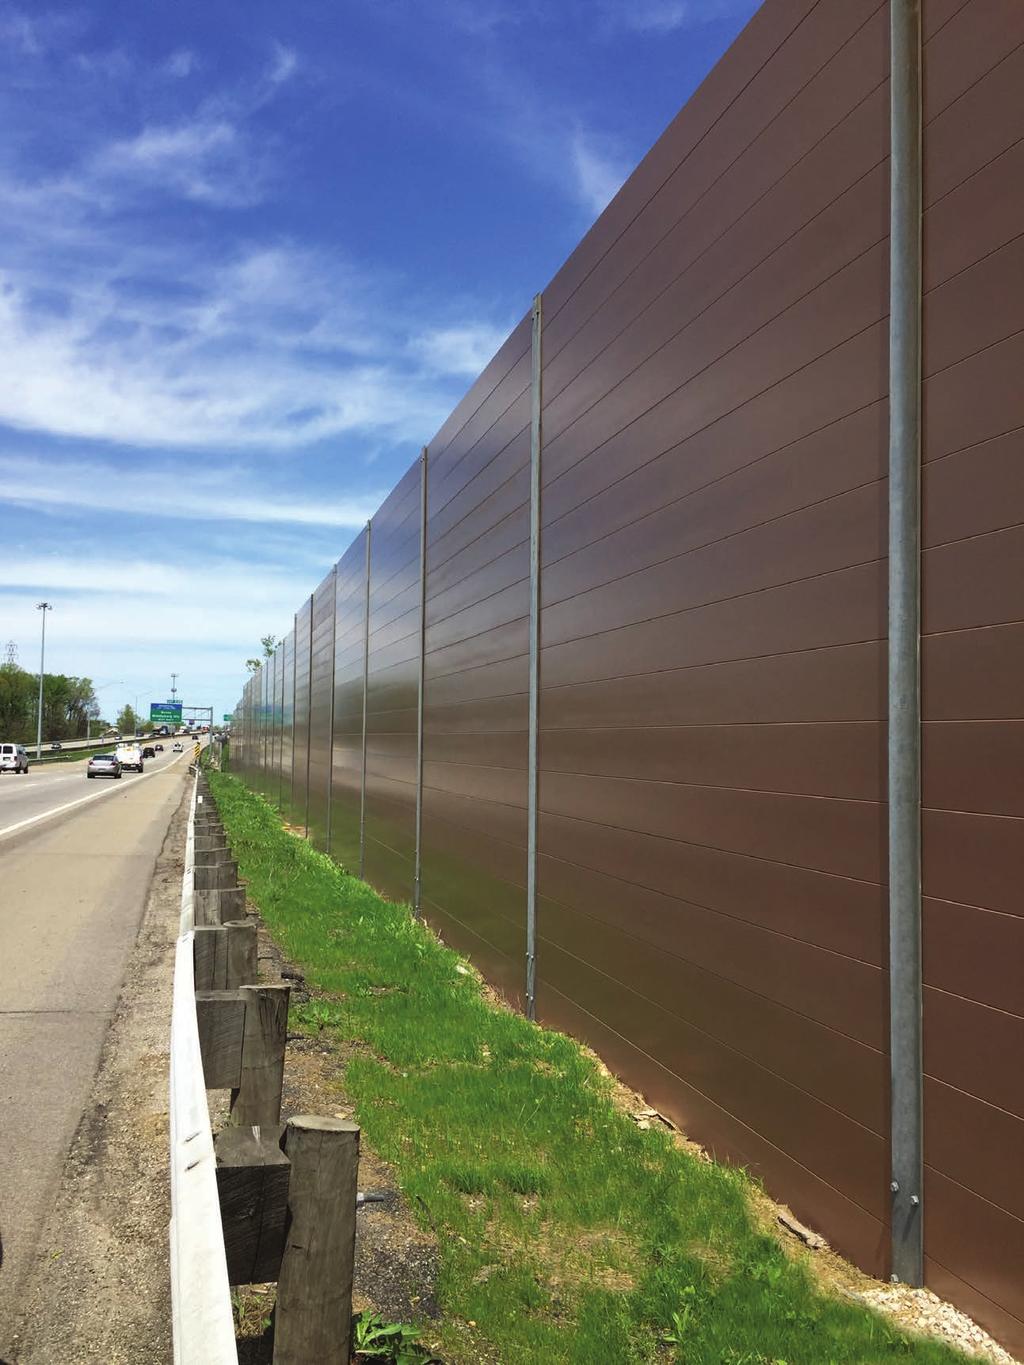 Engineered fiberglass composite construction is built to last up to 50 years Durable construction is rust-proof and corrosion-resistant Extremely low maintenance over the product life saves time,